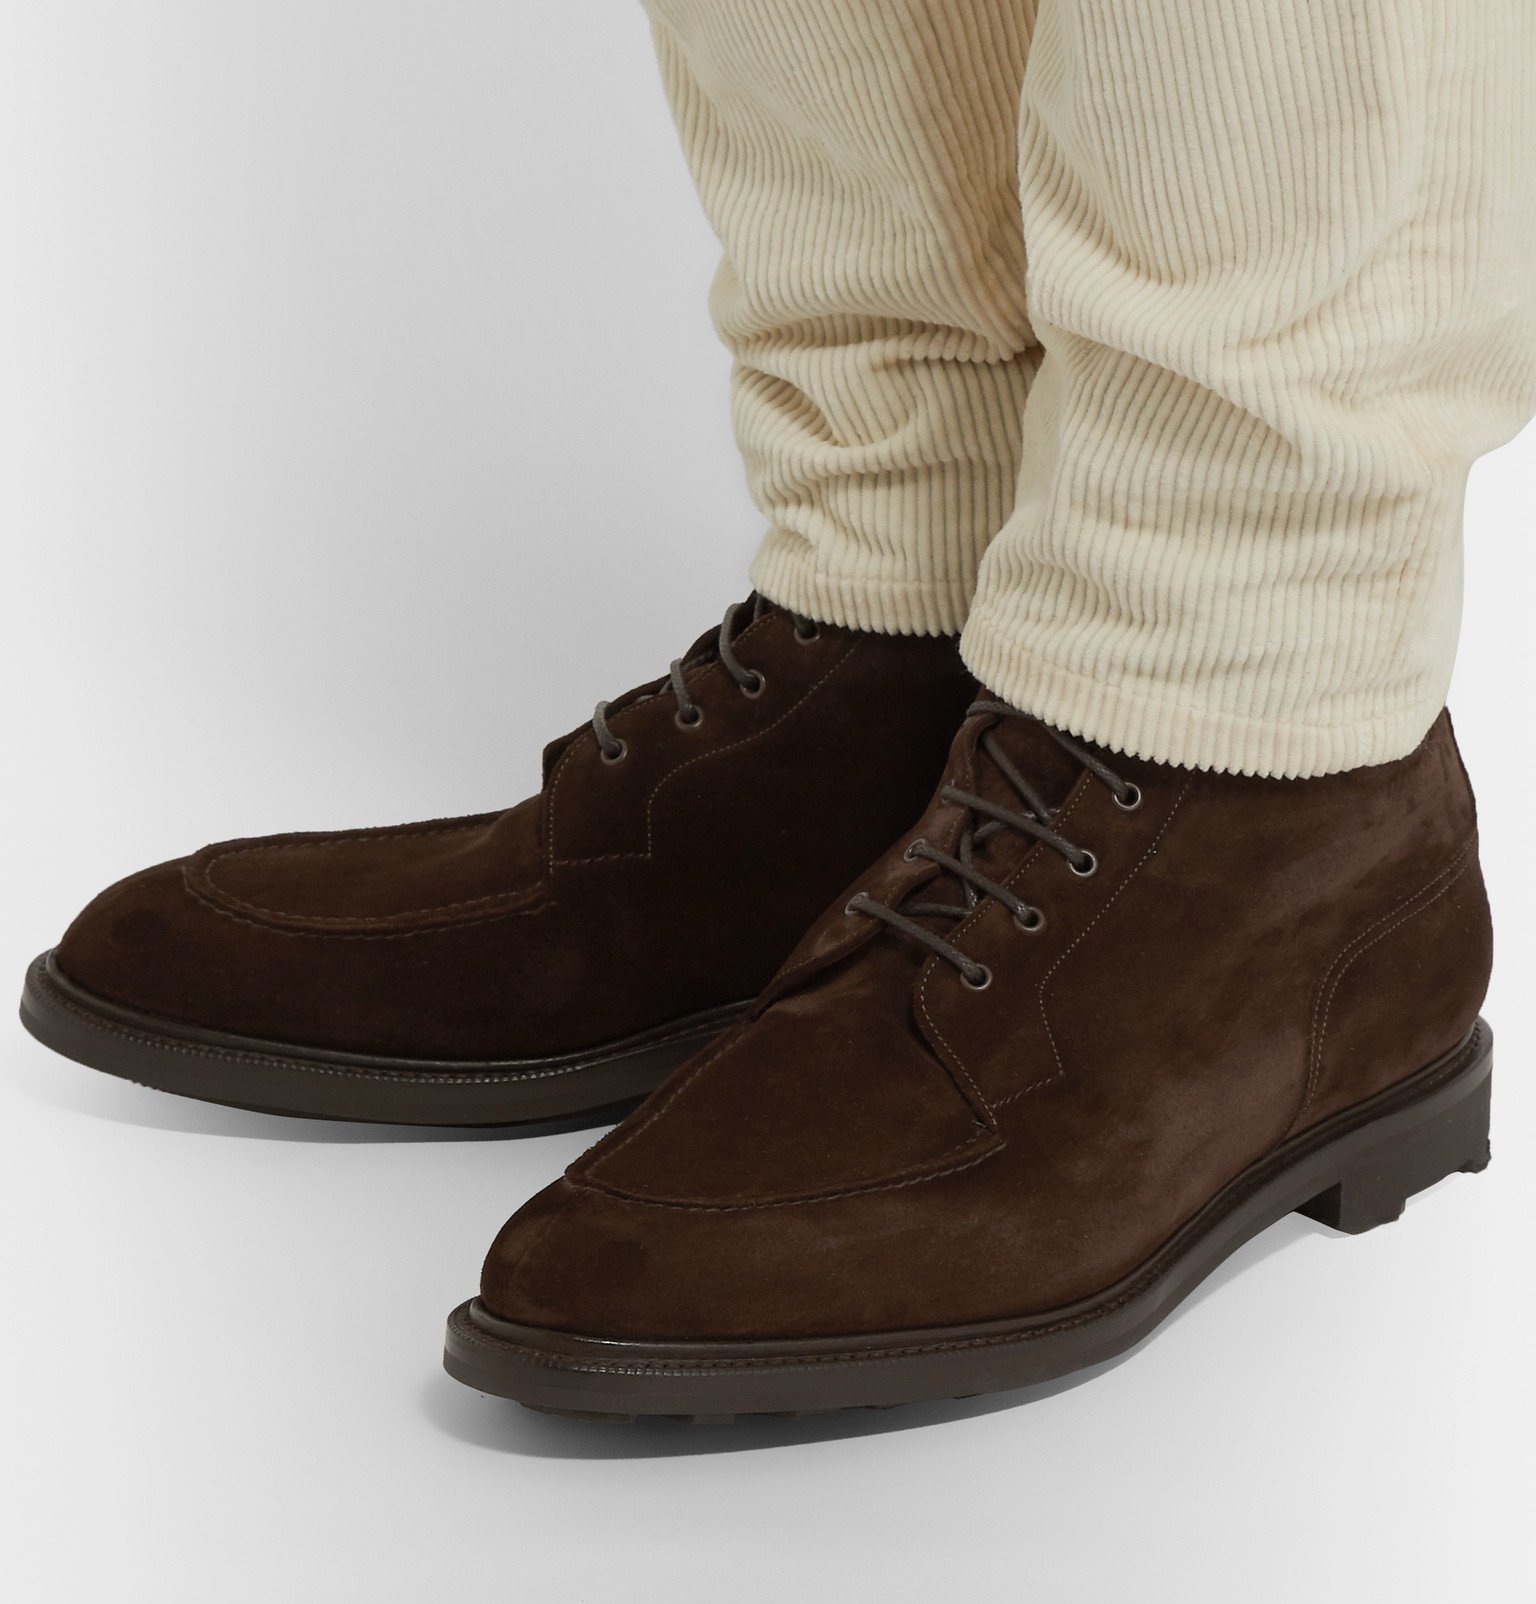 Edward Green - Cranleigh Shearling-Lined Full-Grain Leather Boots ...